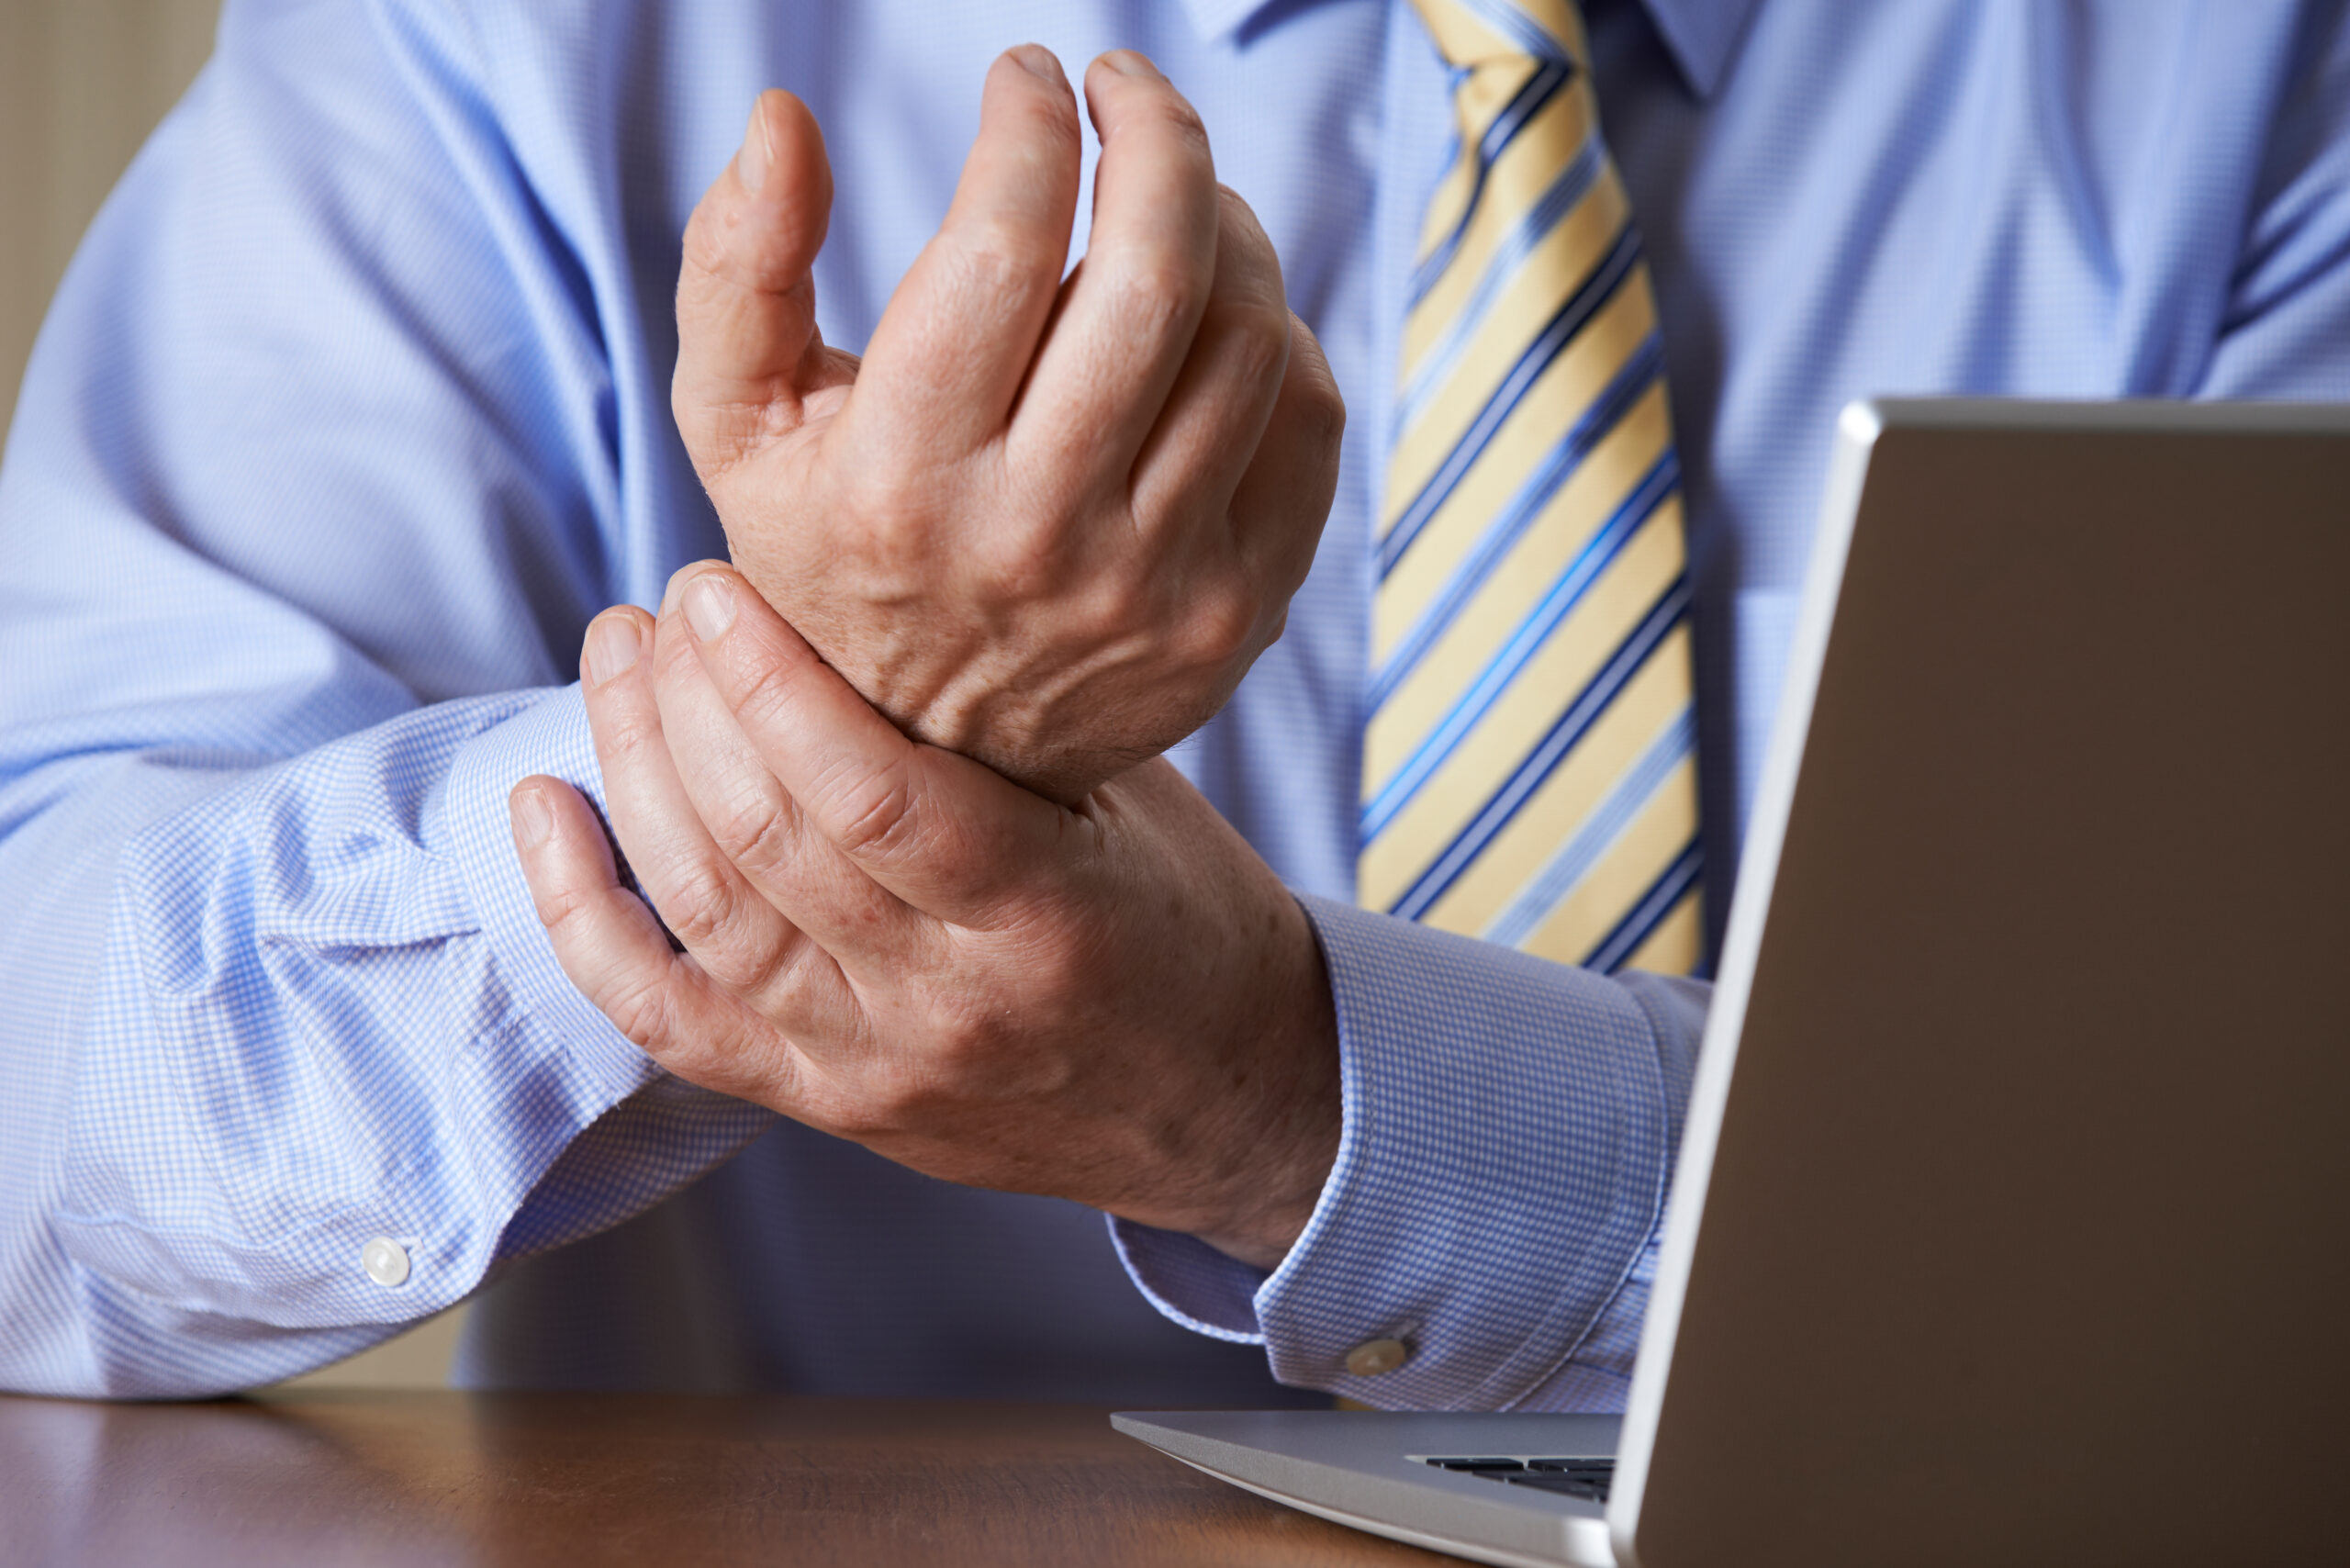 Repetitive Motion Injuries: Habits To Avoid At Work Bountiful UT